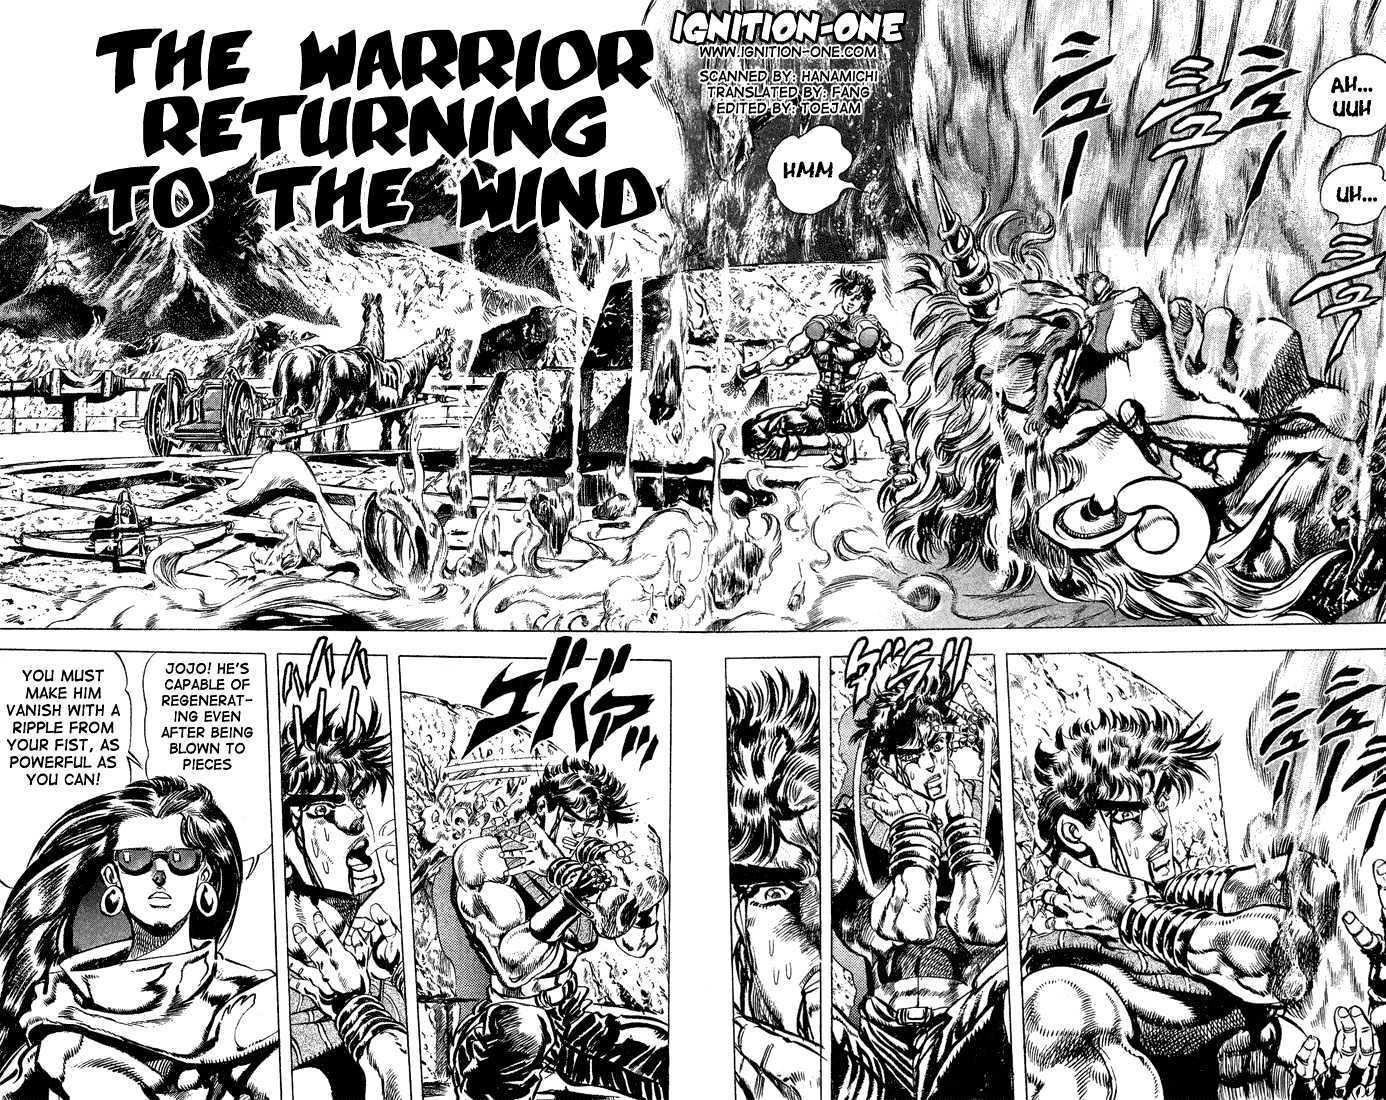 Jojo's Bizarre Adventure Vol.11 Chapter 104 : The Warrior Returning To The Wind page 2 - 